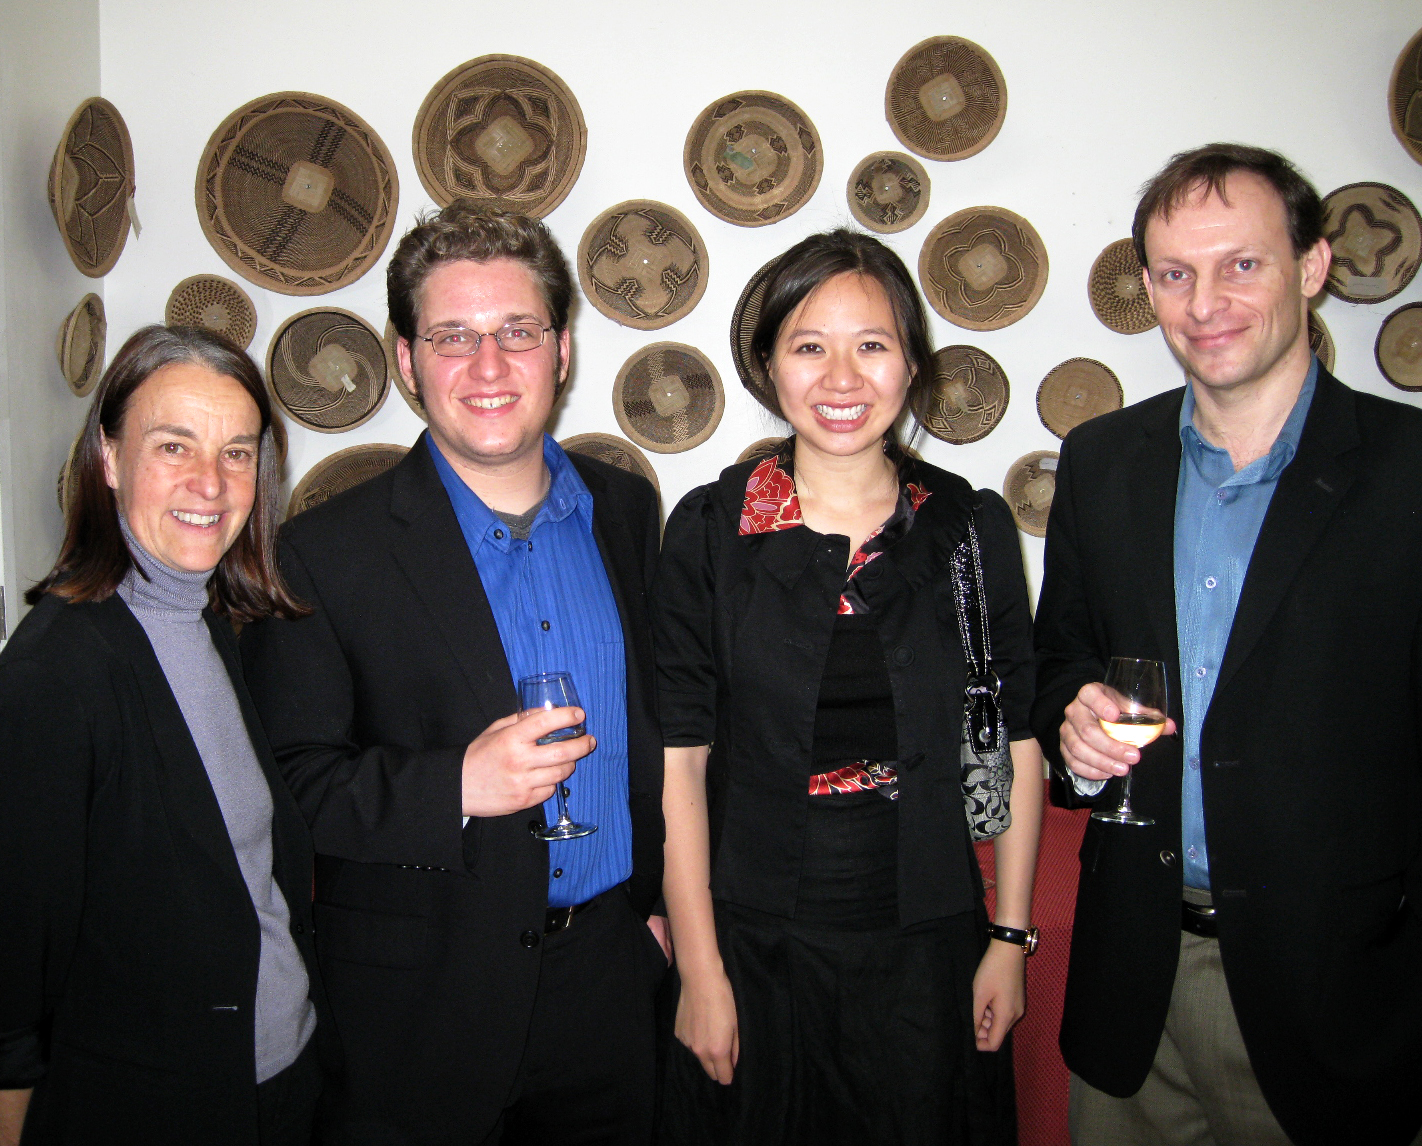 Martin Benvenuto of WomenSing, mentor Libby Larsen, and 2010 composers Elizabeth Lim and Joshua Fishbein.